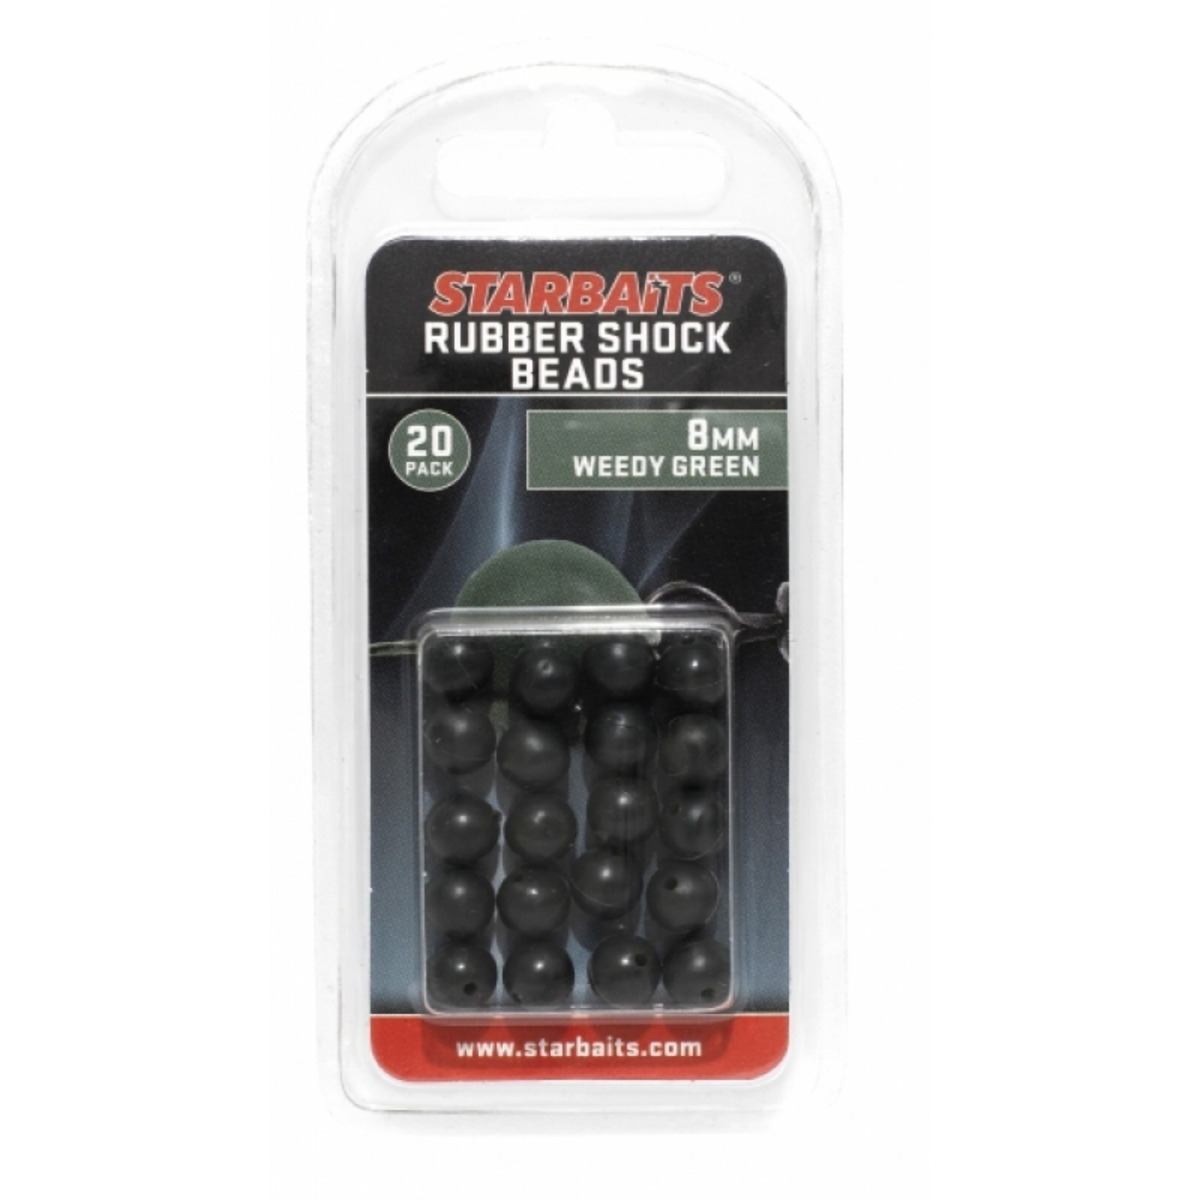 Starbaits Rubber Schock Beads 8mm - Weedy Green